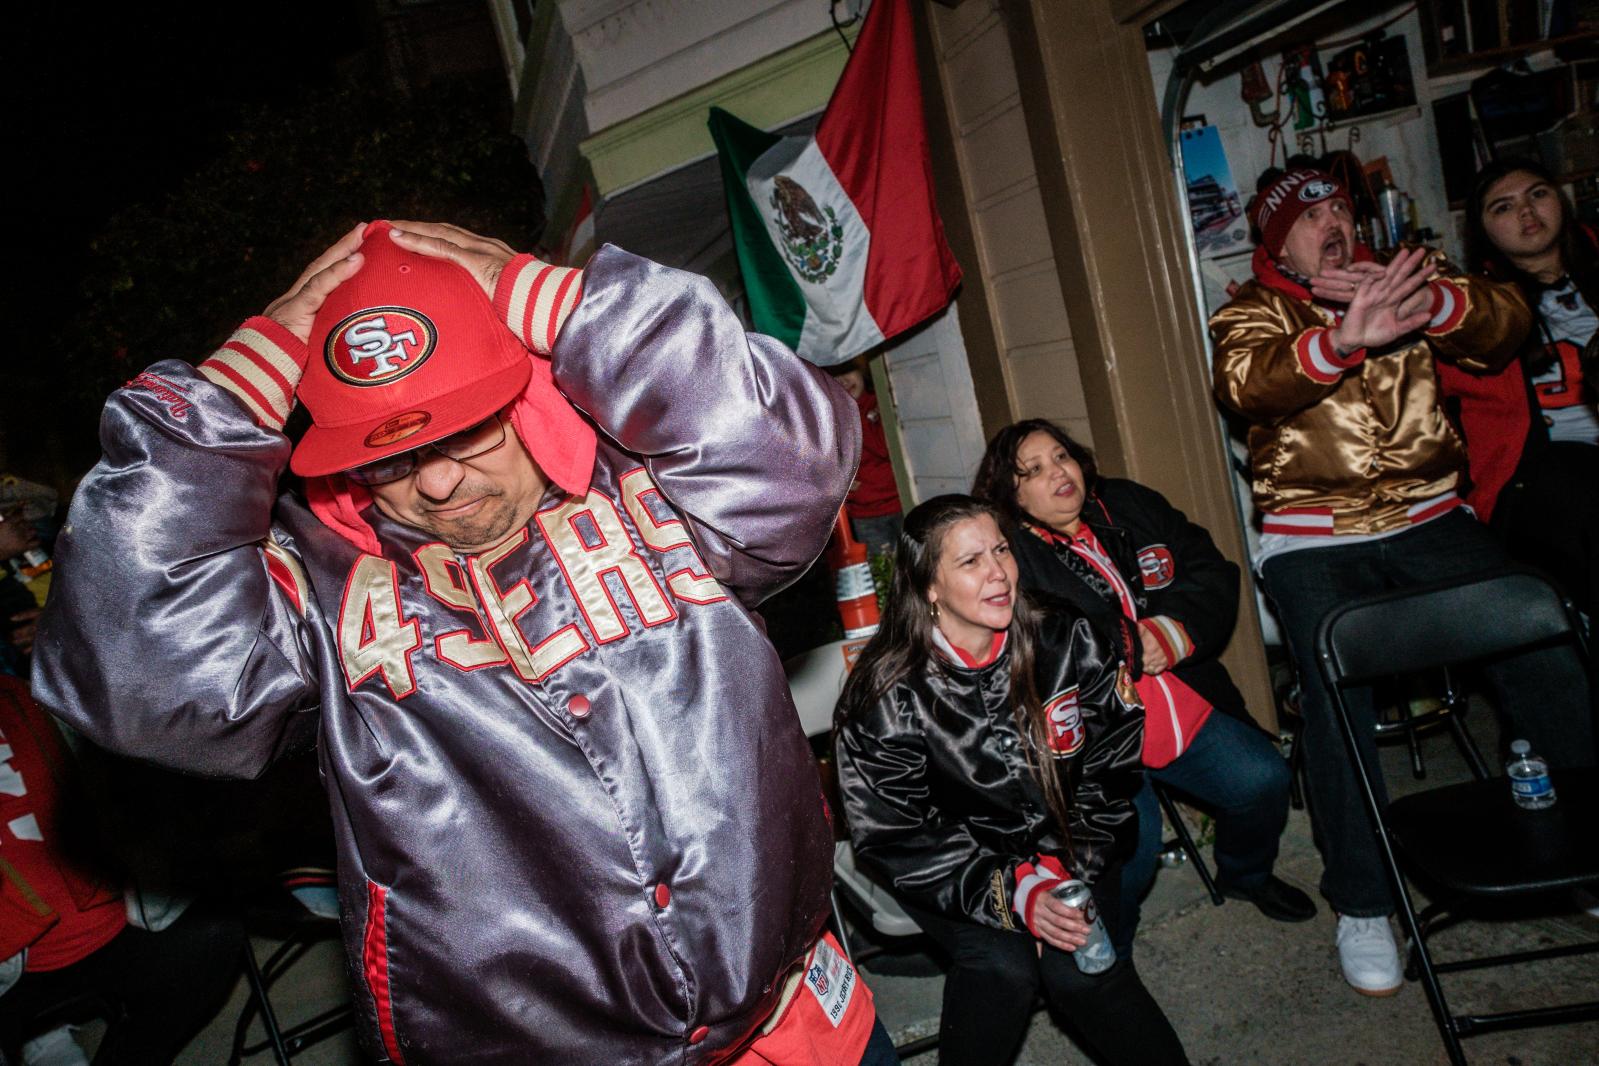 Image from A Scarlet and Gold Neighborhood - Michael Brown reacts to the 49ers loss in the Super Bowl...